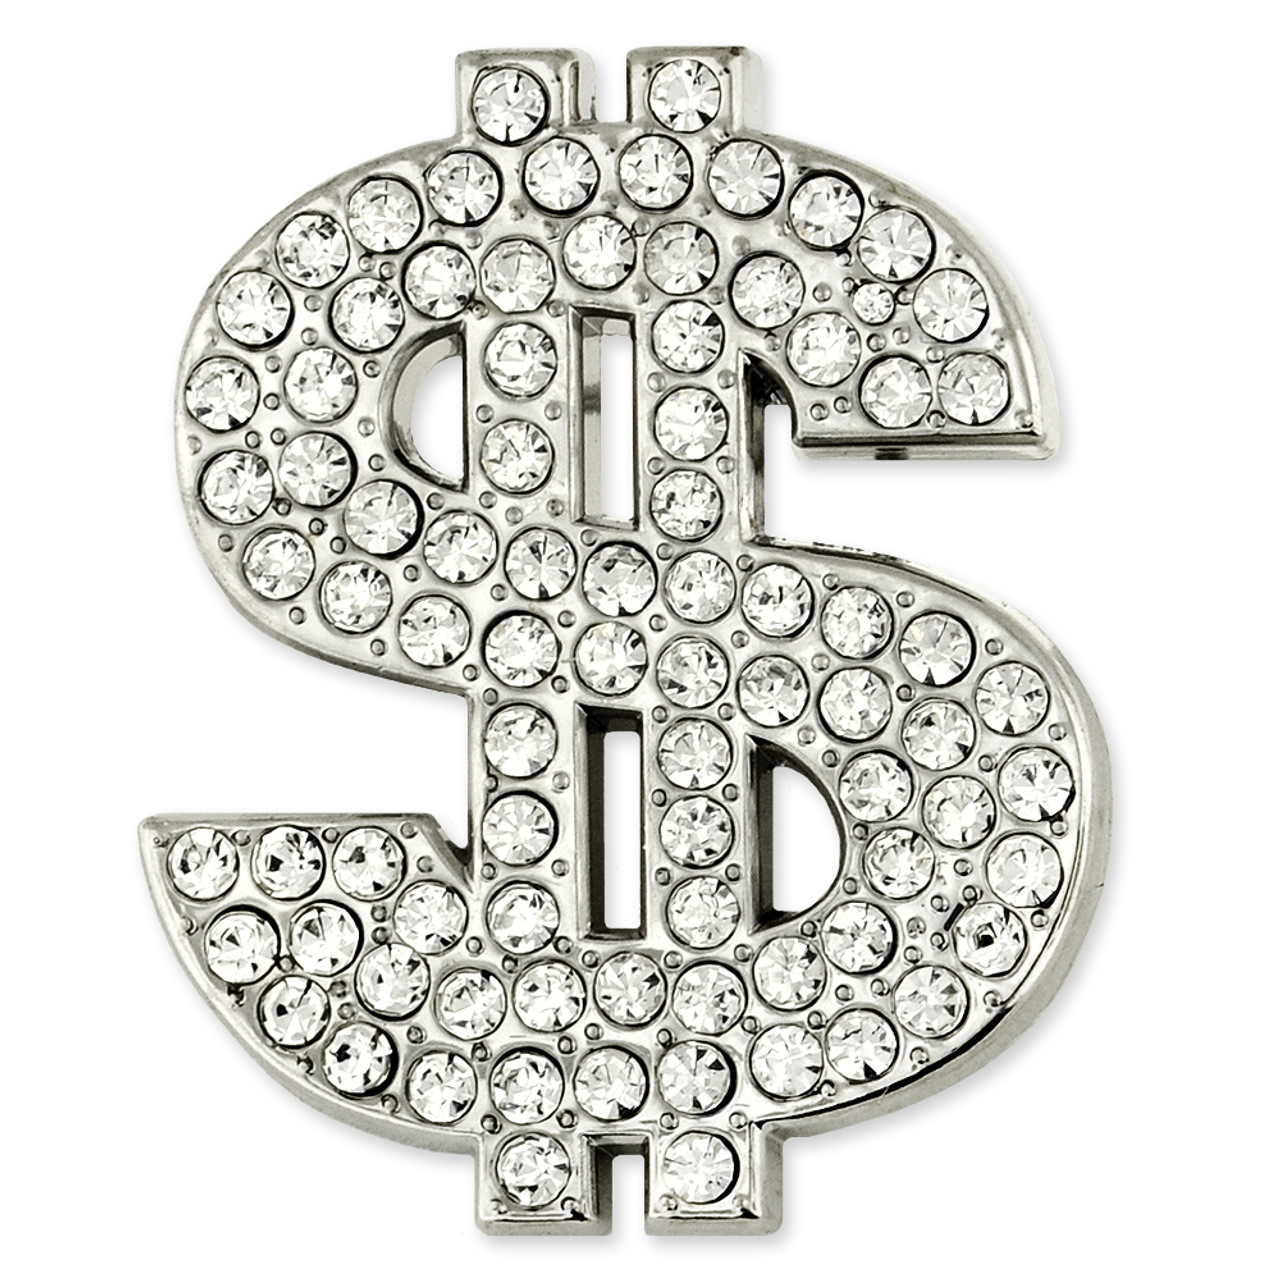 Rhinestone Dollar Sign ($) Pin | Multi Color | Safety Pins by PinMart